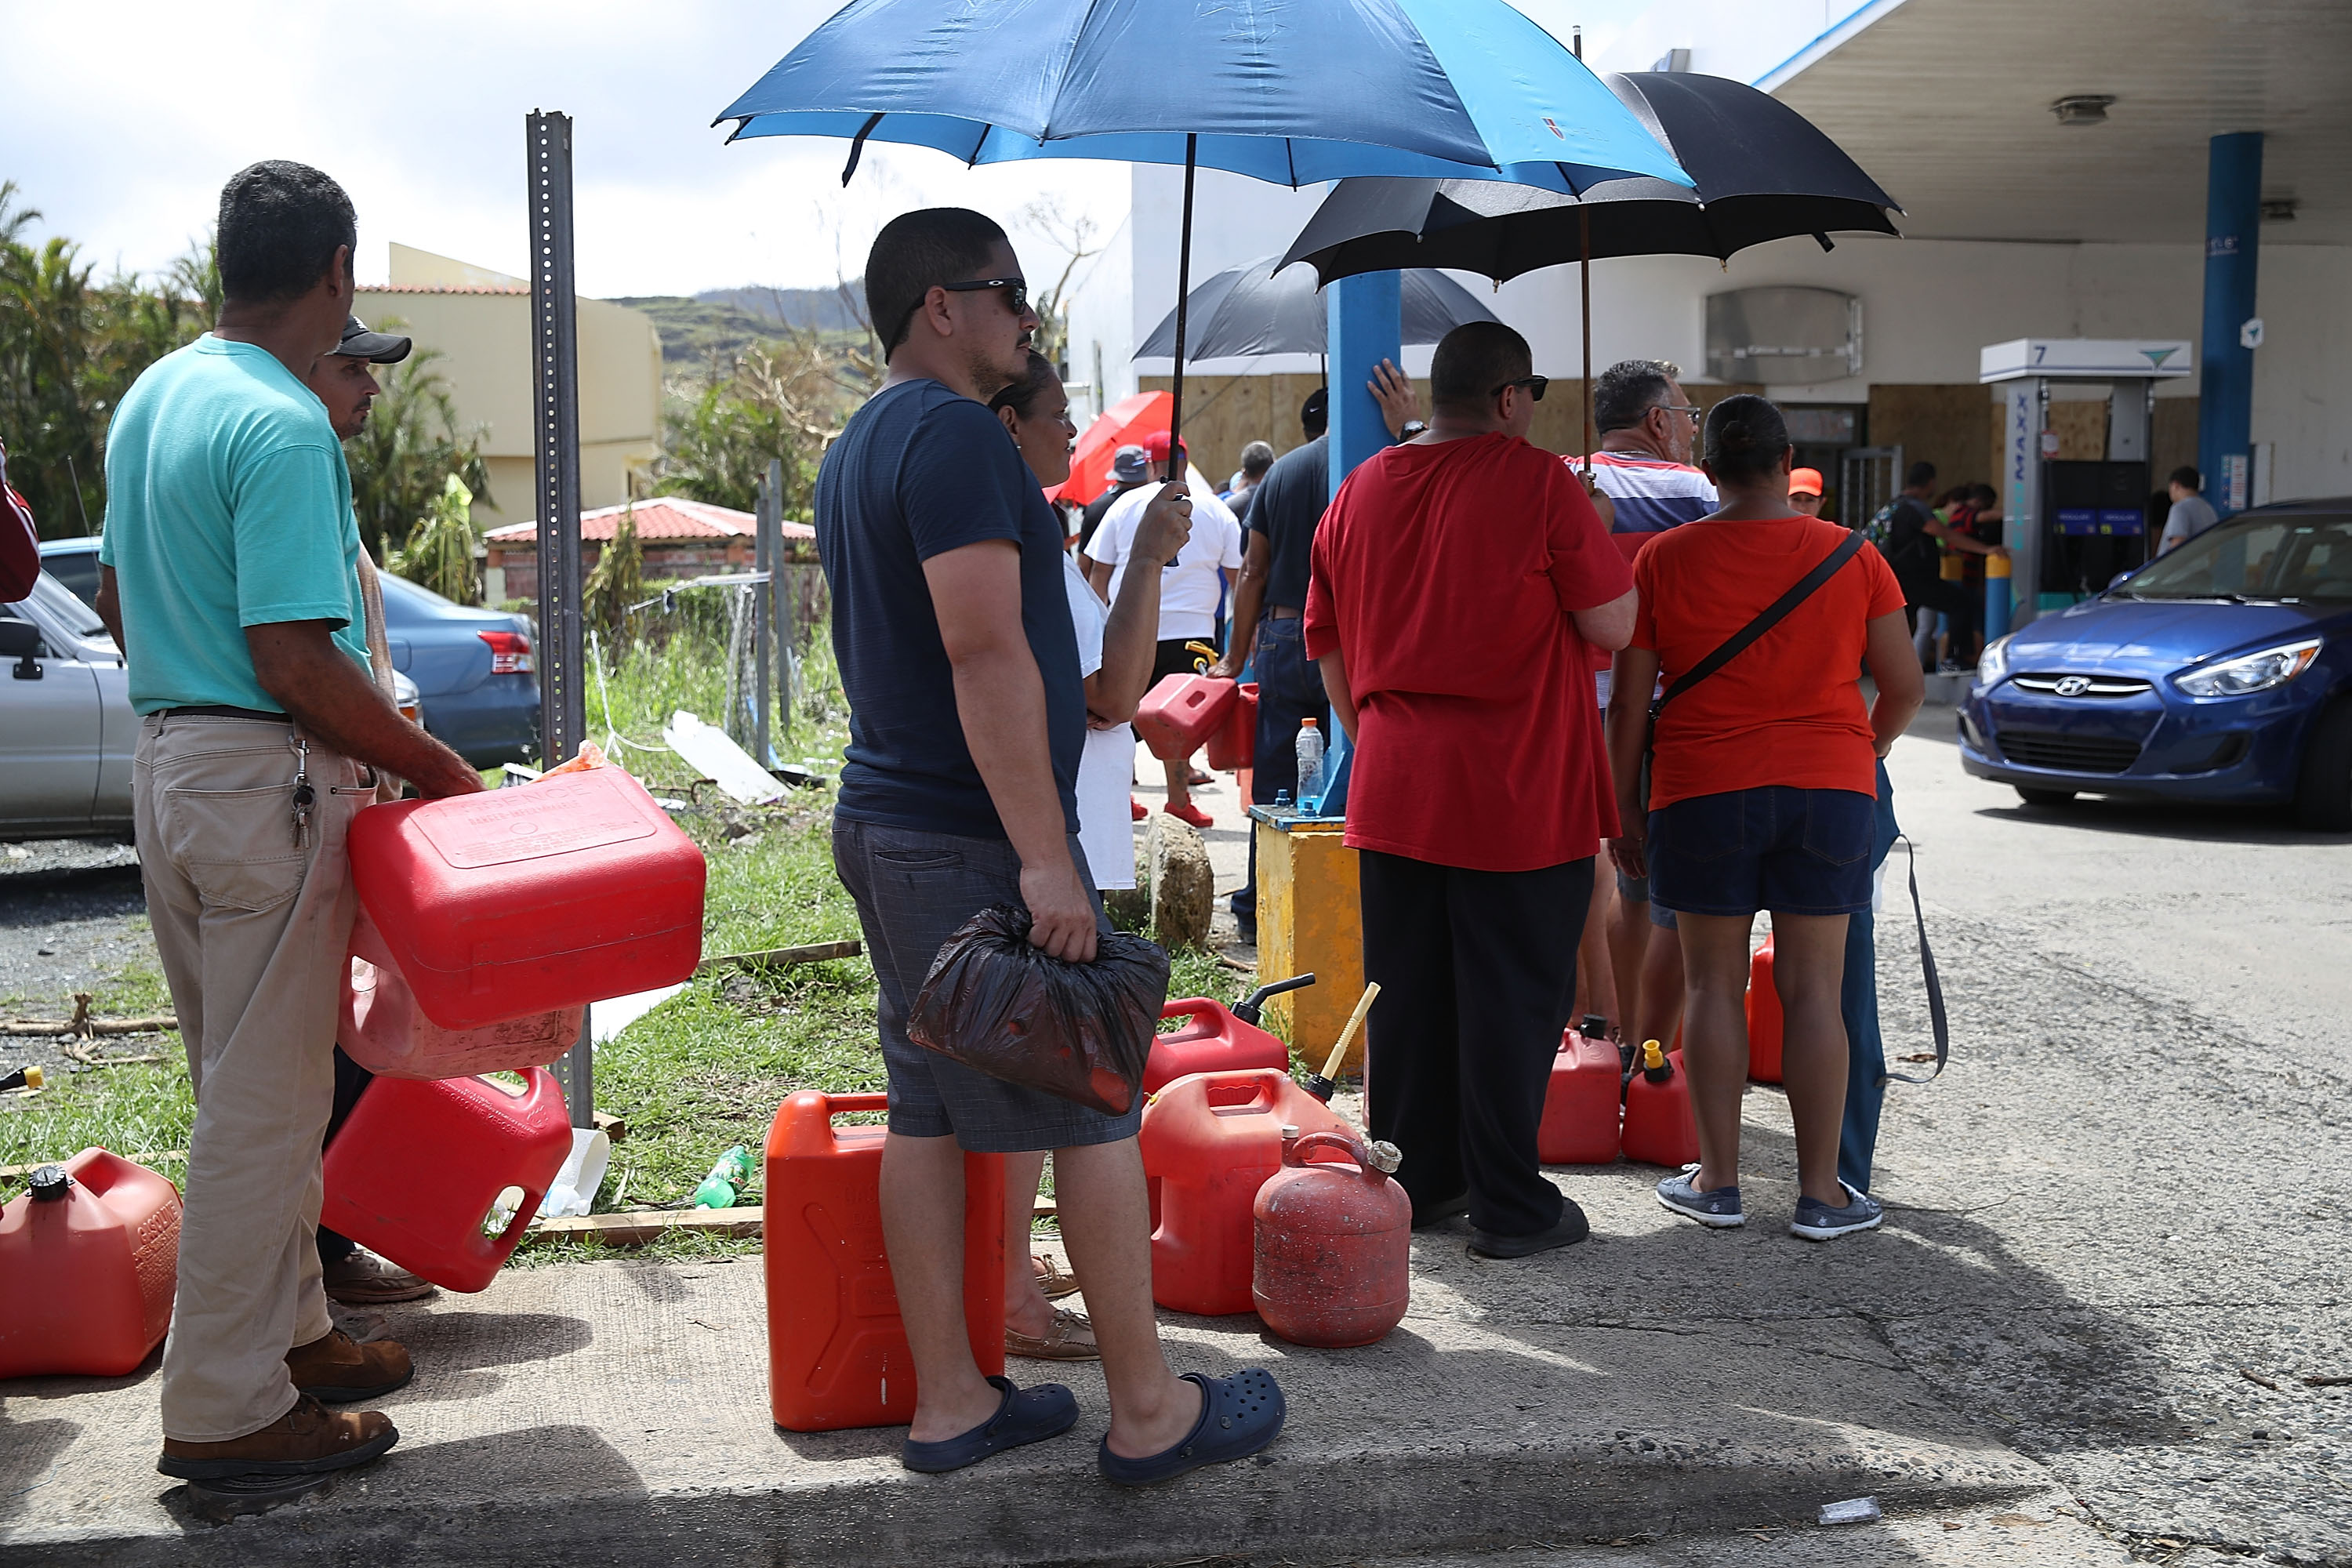 People wait in line for gas as they wait for gas, electrical and water grids to be repaired September 24, 2017 in Aibonito, Puerto Rico. Puerto Rico experienced widespread damage after Hurricane Maria, a category 4 hurricane, passed through. (Photo by Joe Raedle/Getty Images)